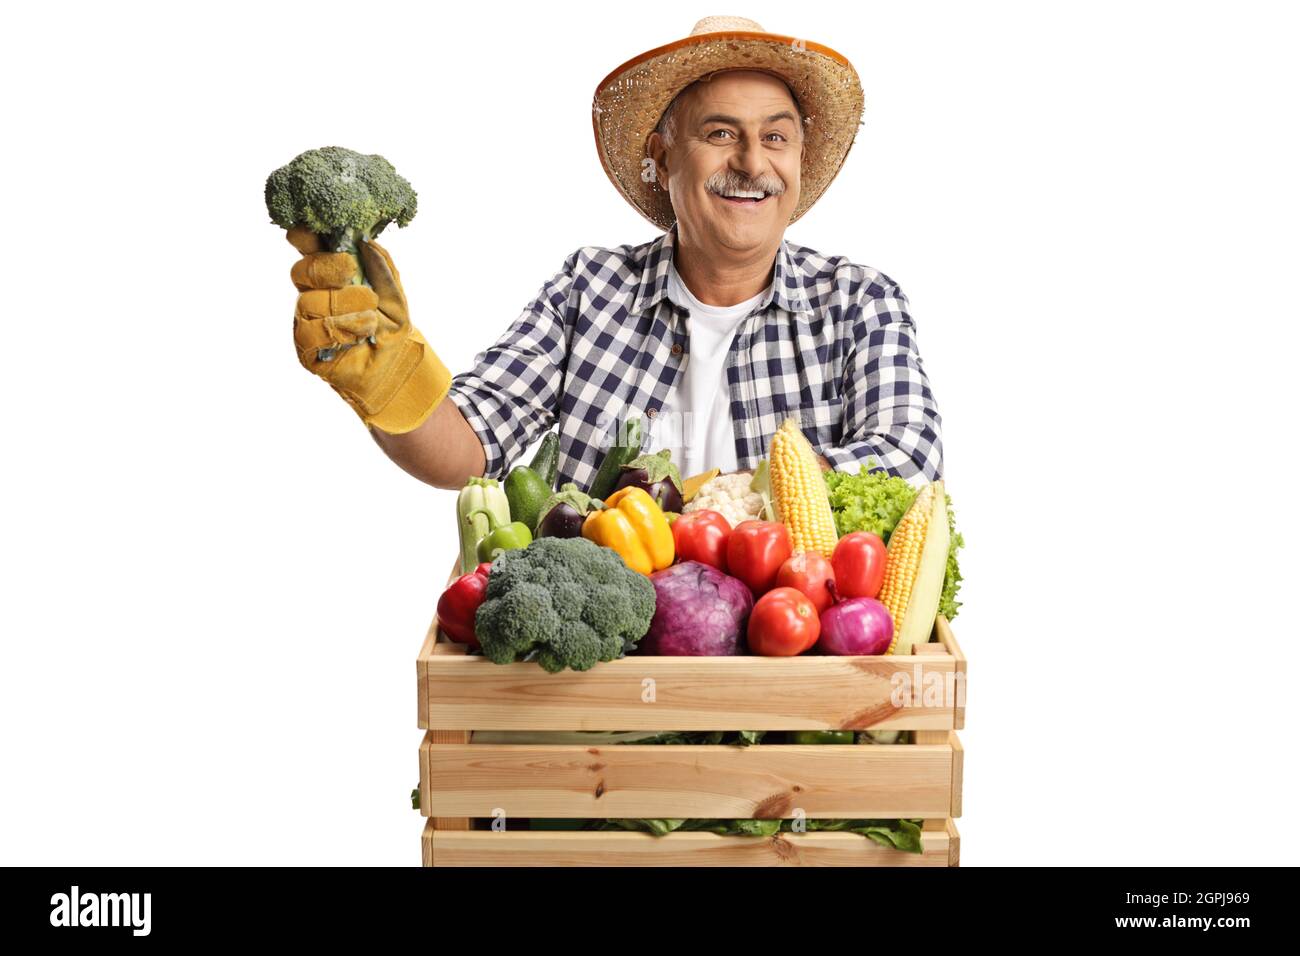 Smiling mature farmer holding broccoli and standing behind a crate with fresh organic vegetables isolated on white background Stock Photo